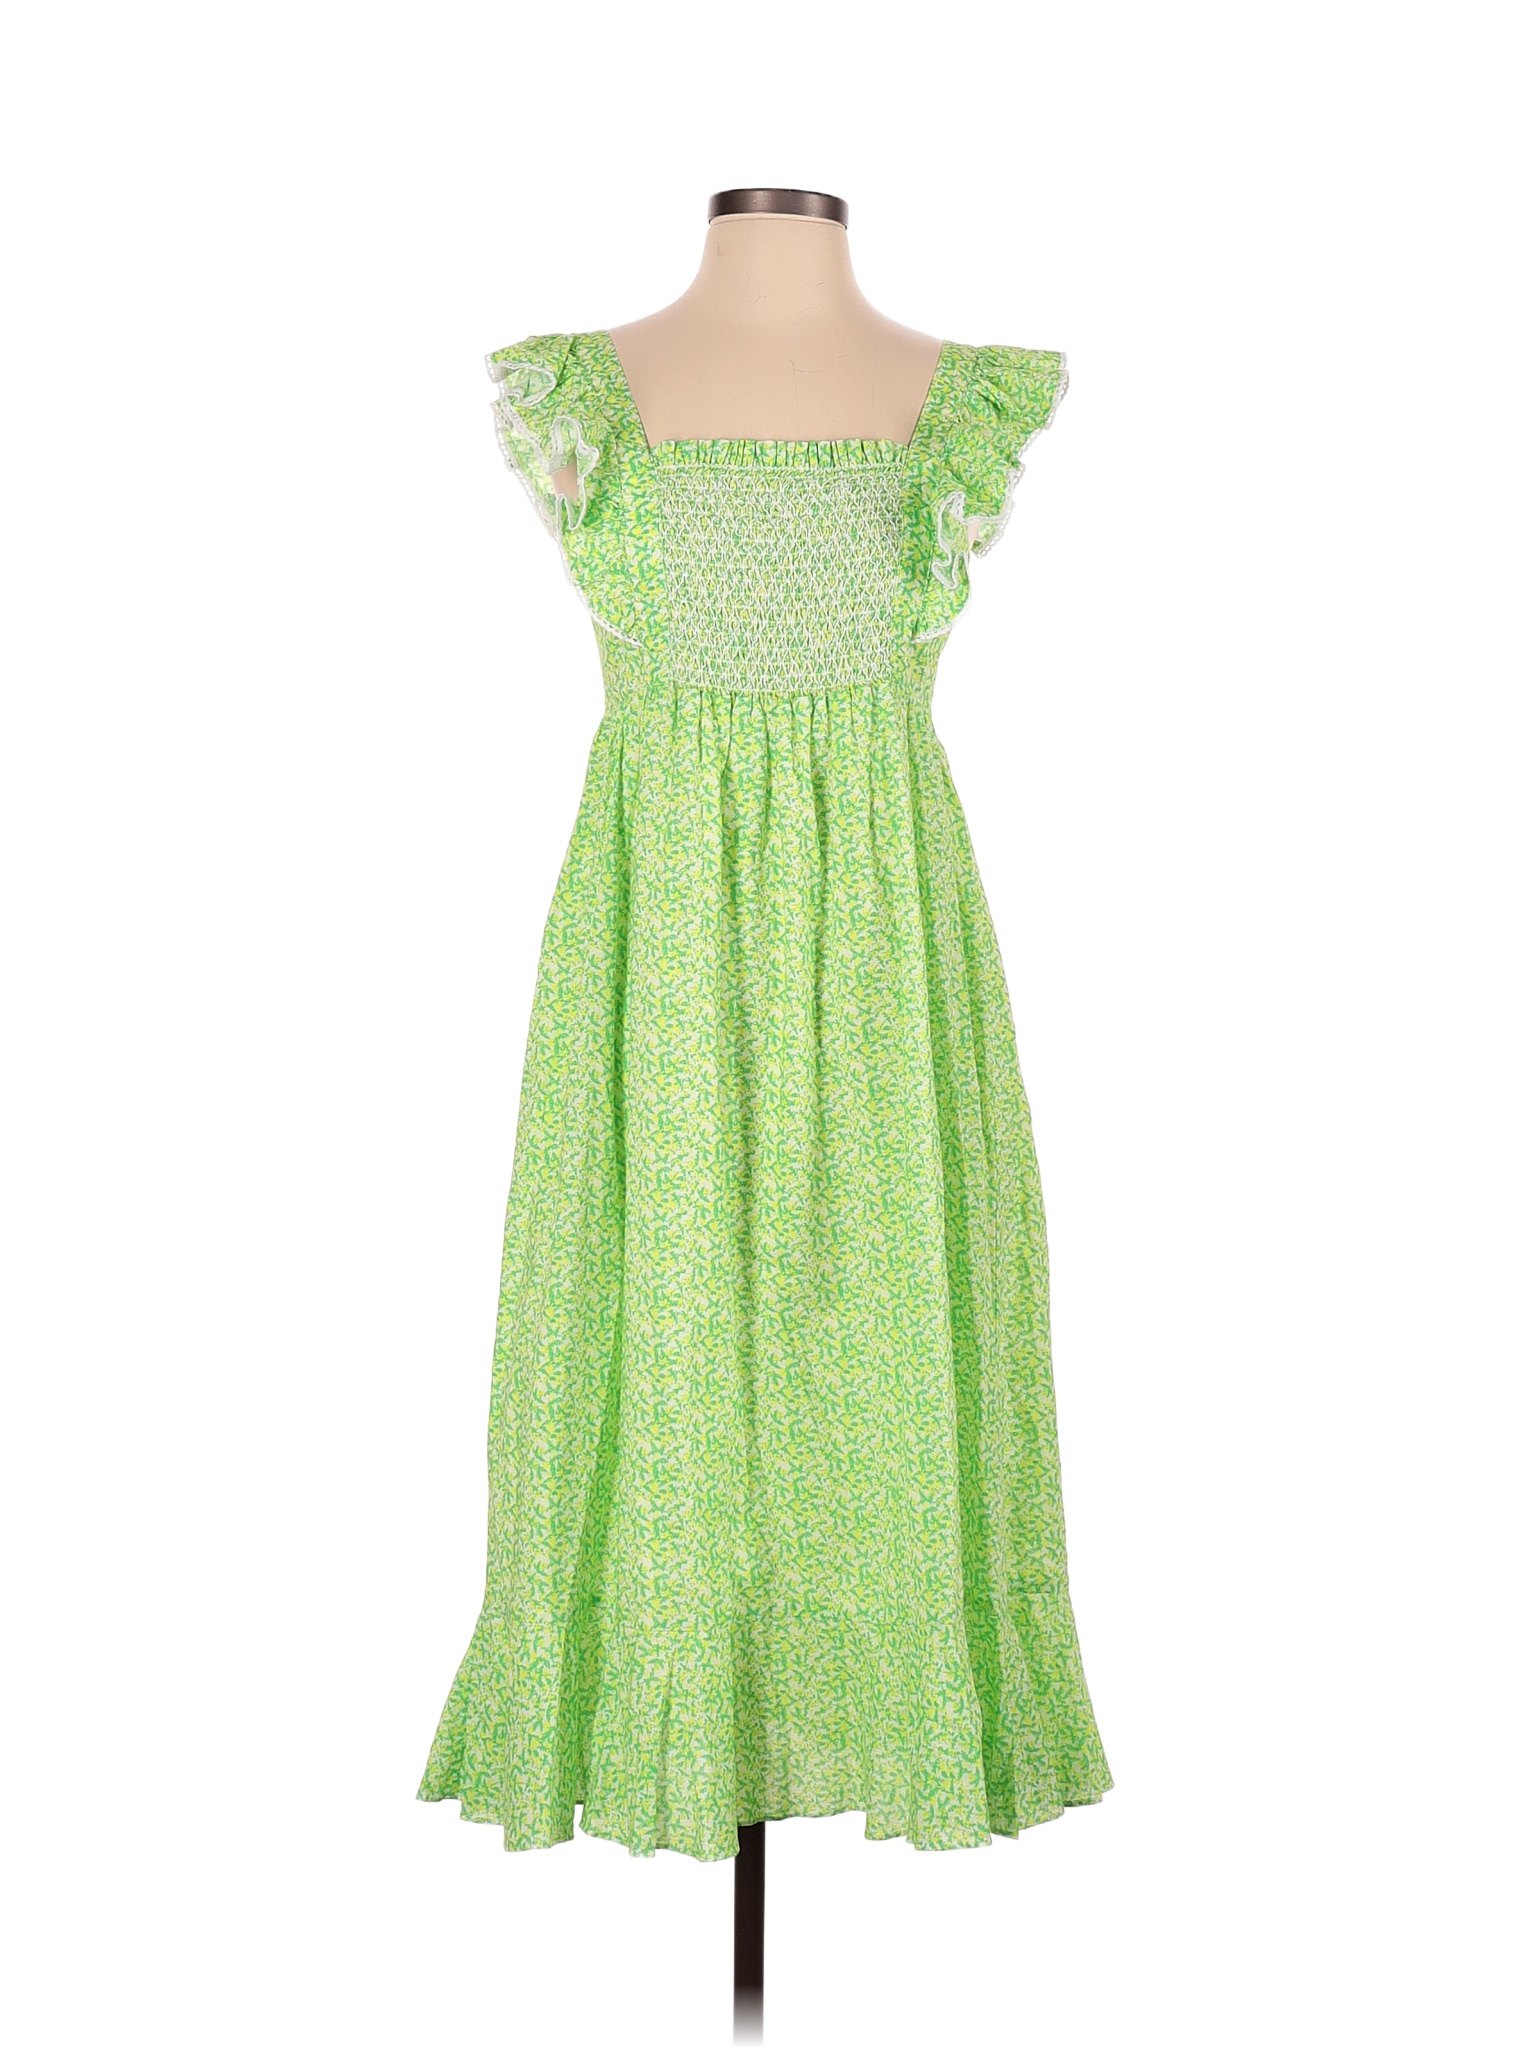 Tuckernuck 100% Cotton Colored Green Casual Dress Size M - 68% off ...